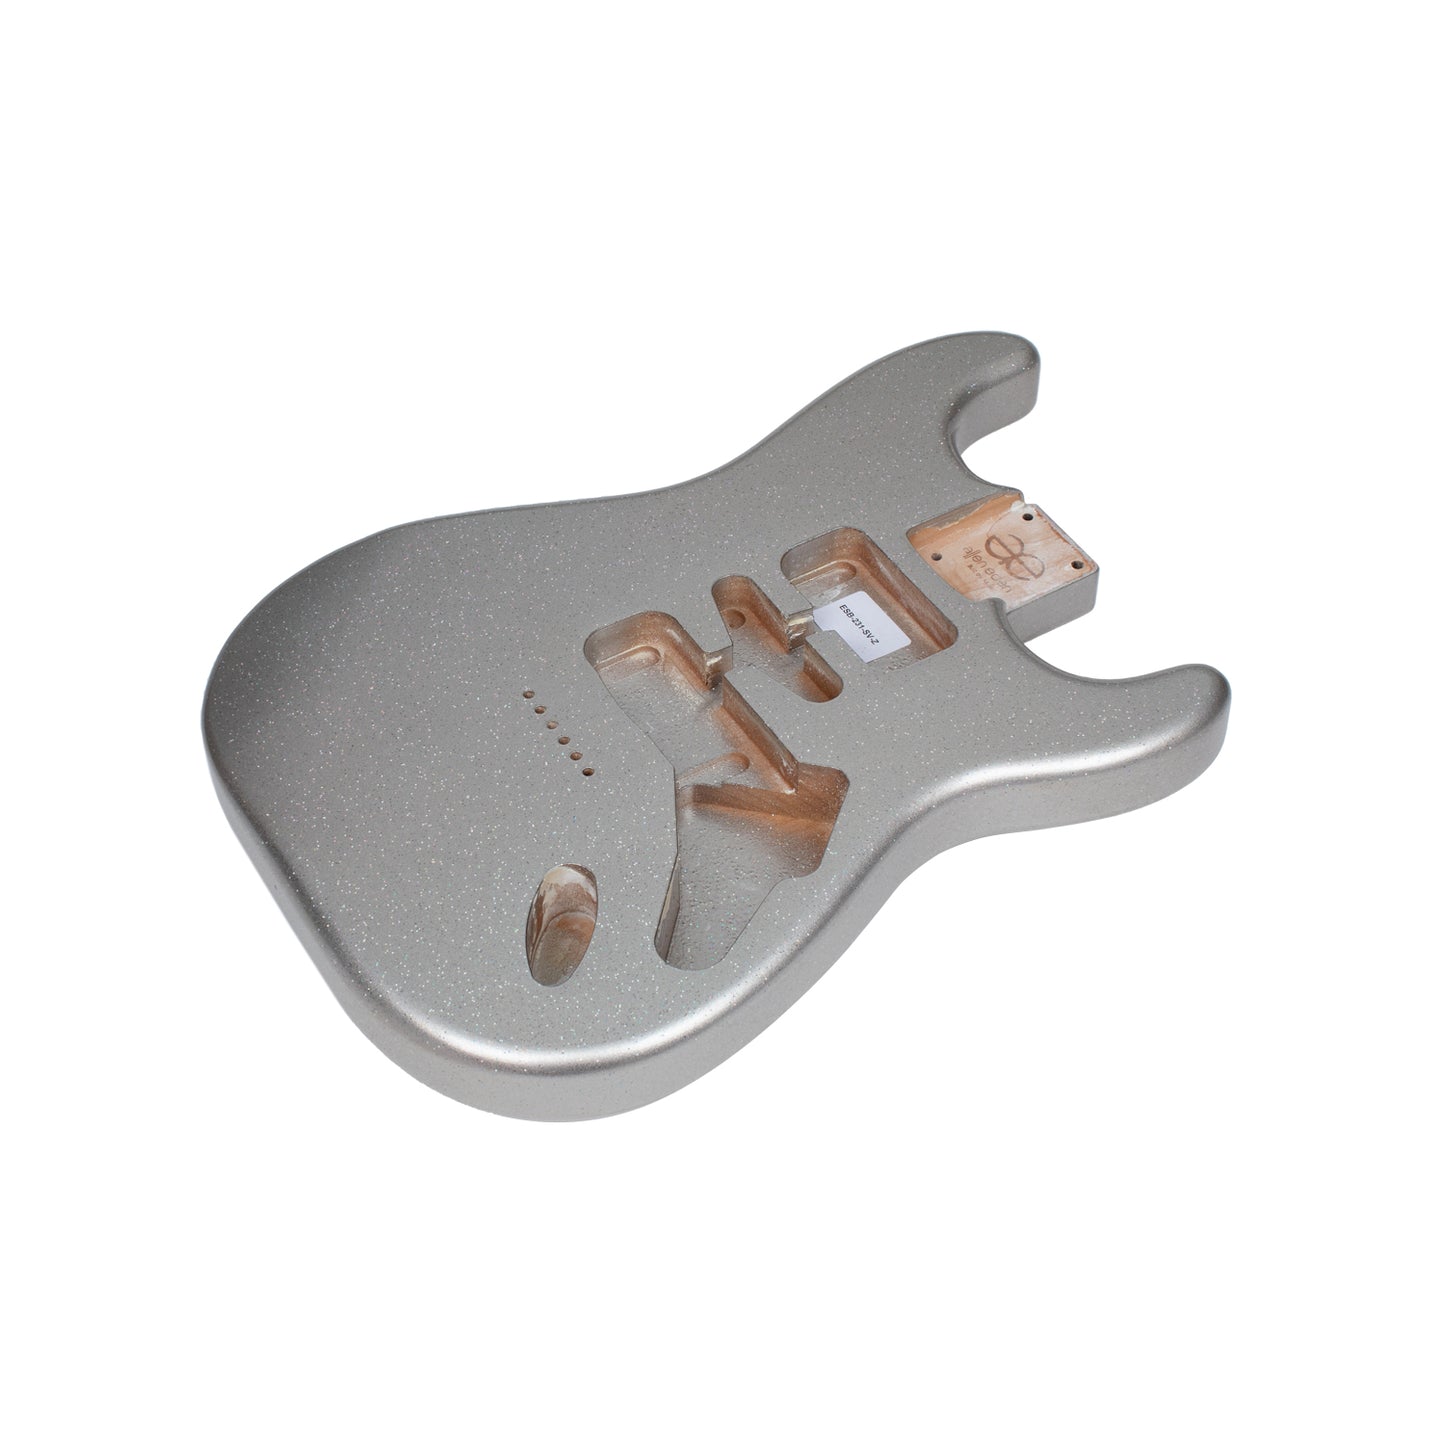 AE Guitars® S-Style Alder Replacement Guitar Body Silver Variant Flake